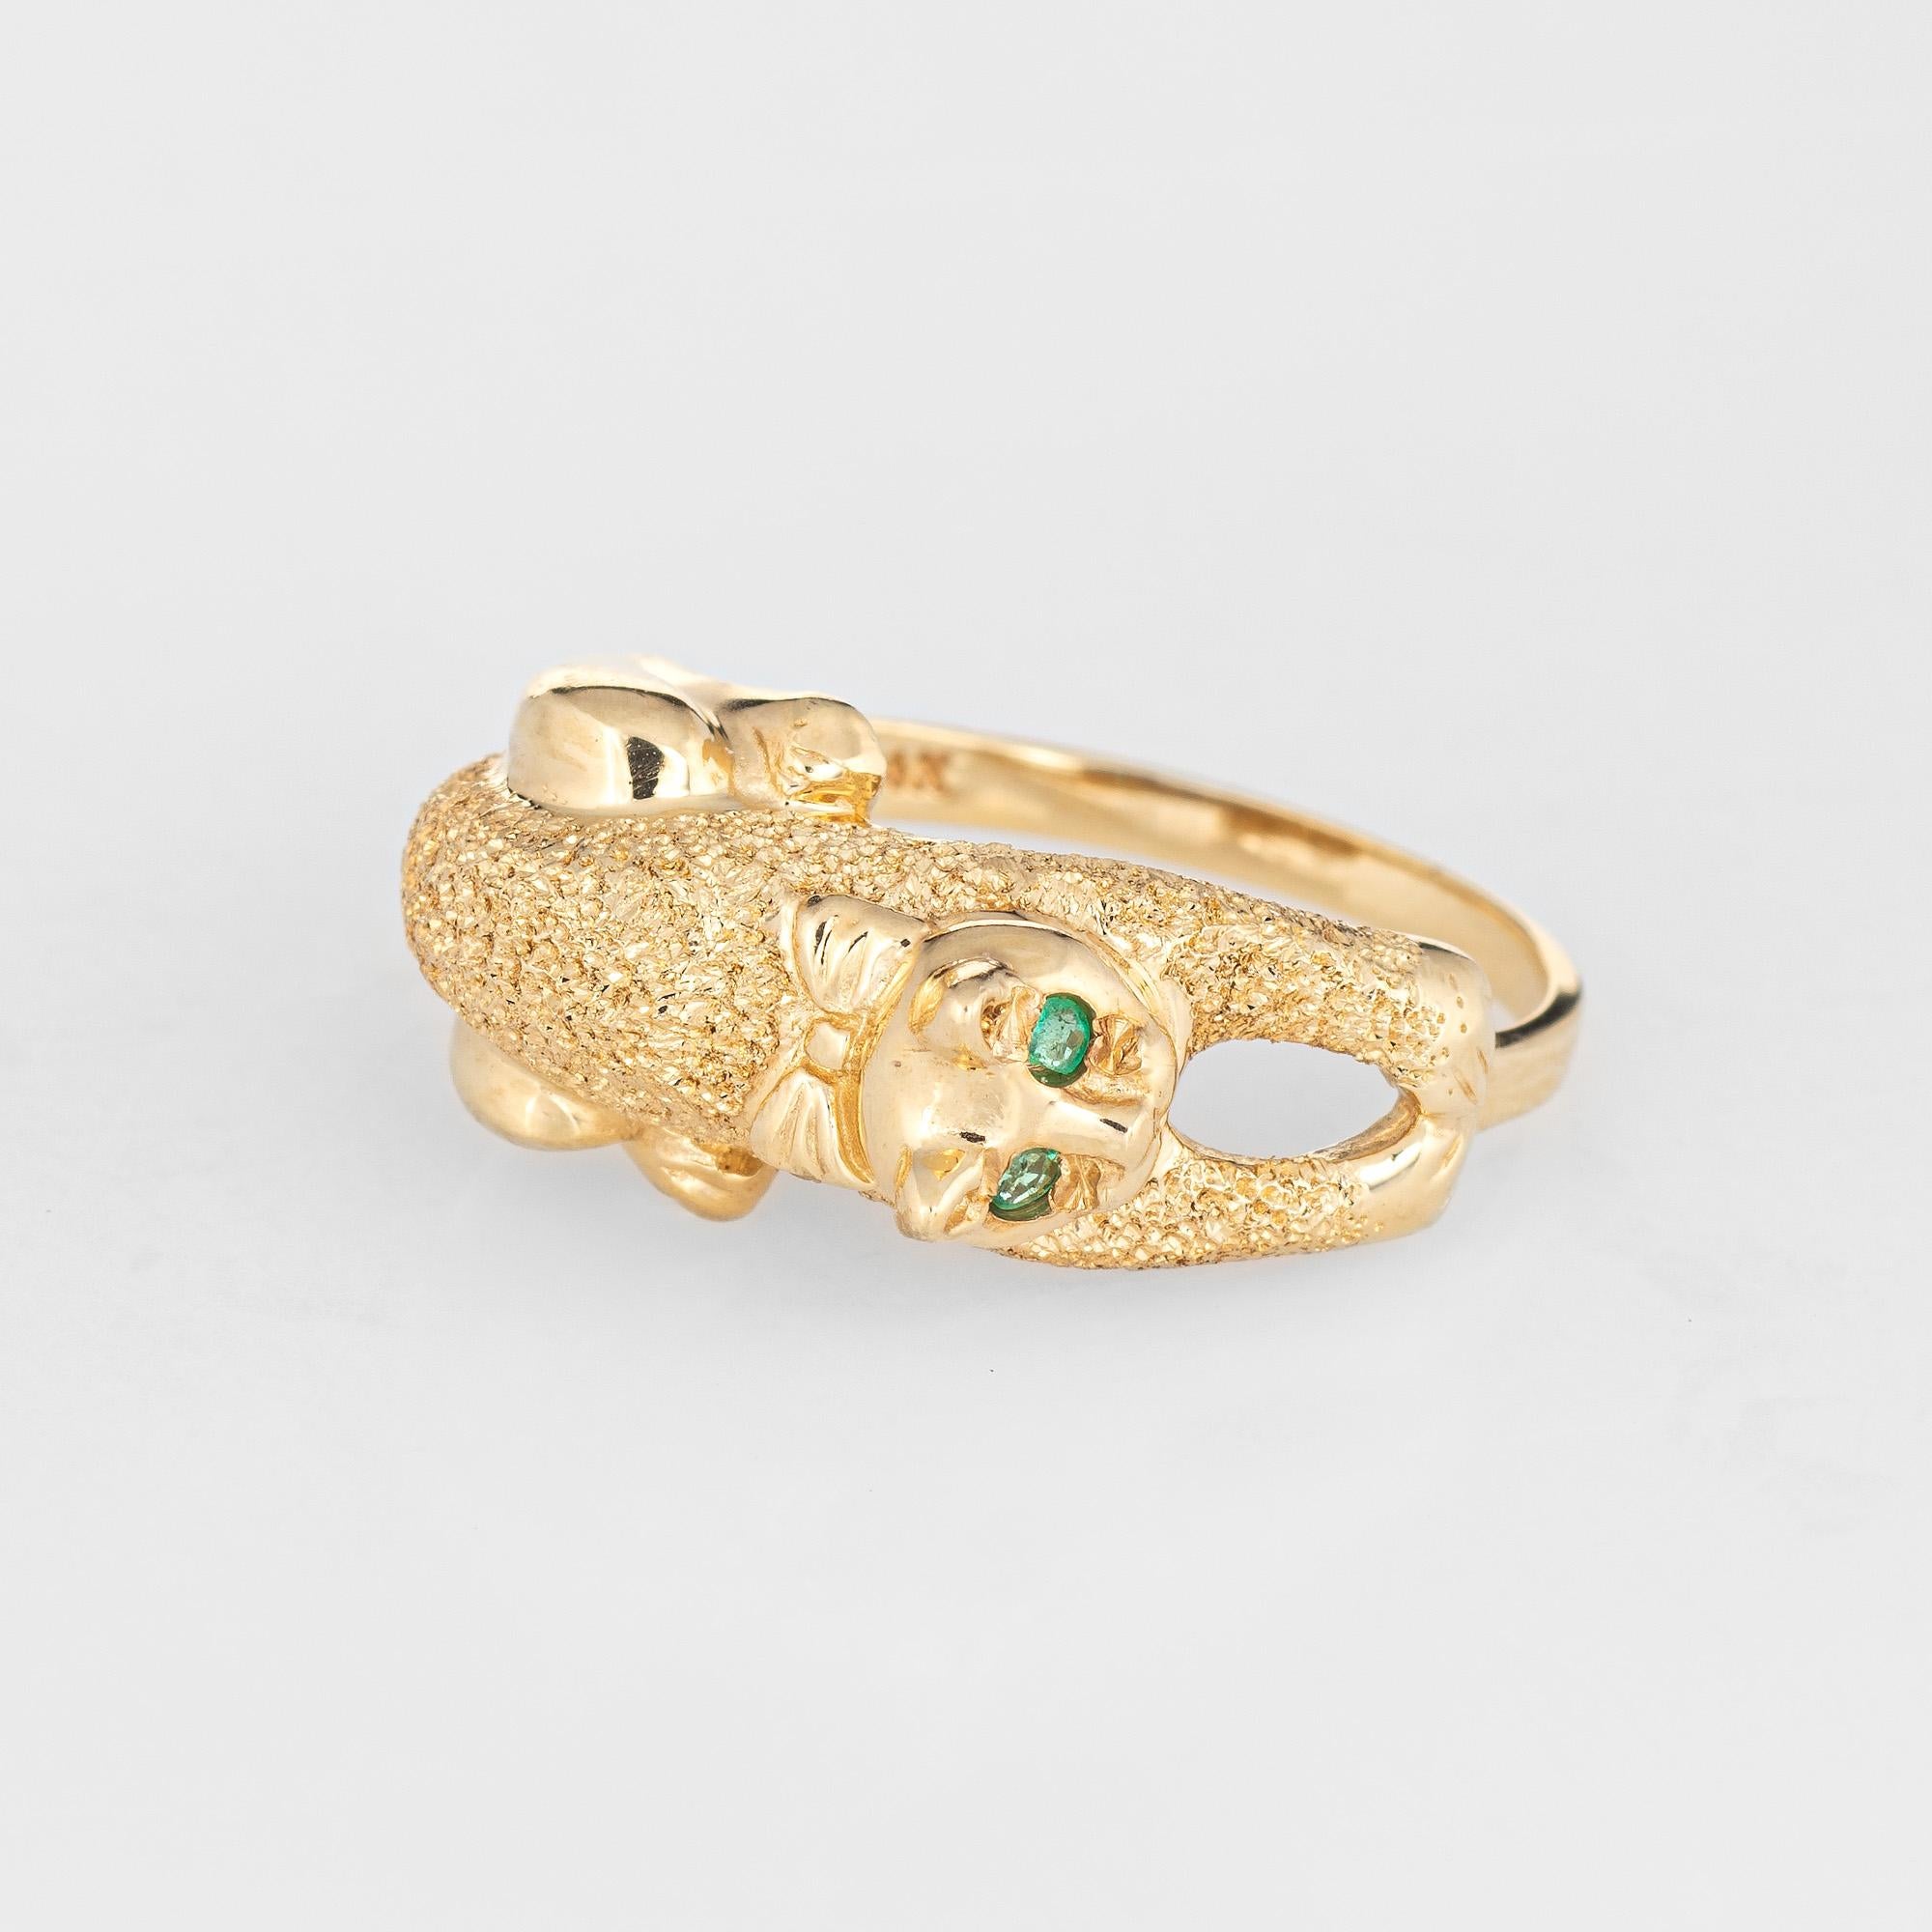 Stylish estate kitty cat ring crafted in 14 karat yellow gold. 

Two emeralds total an estimated 0.02 carats. 

The kitty cat features emerald eyes with a textured body that offers a subtle shimmer. The cat hugs the finger in what appears to be a